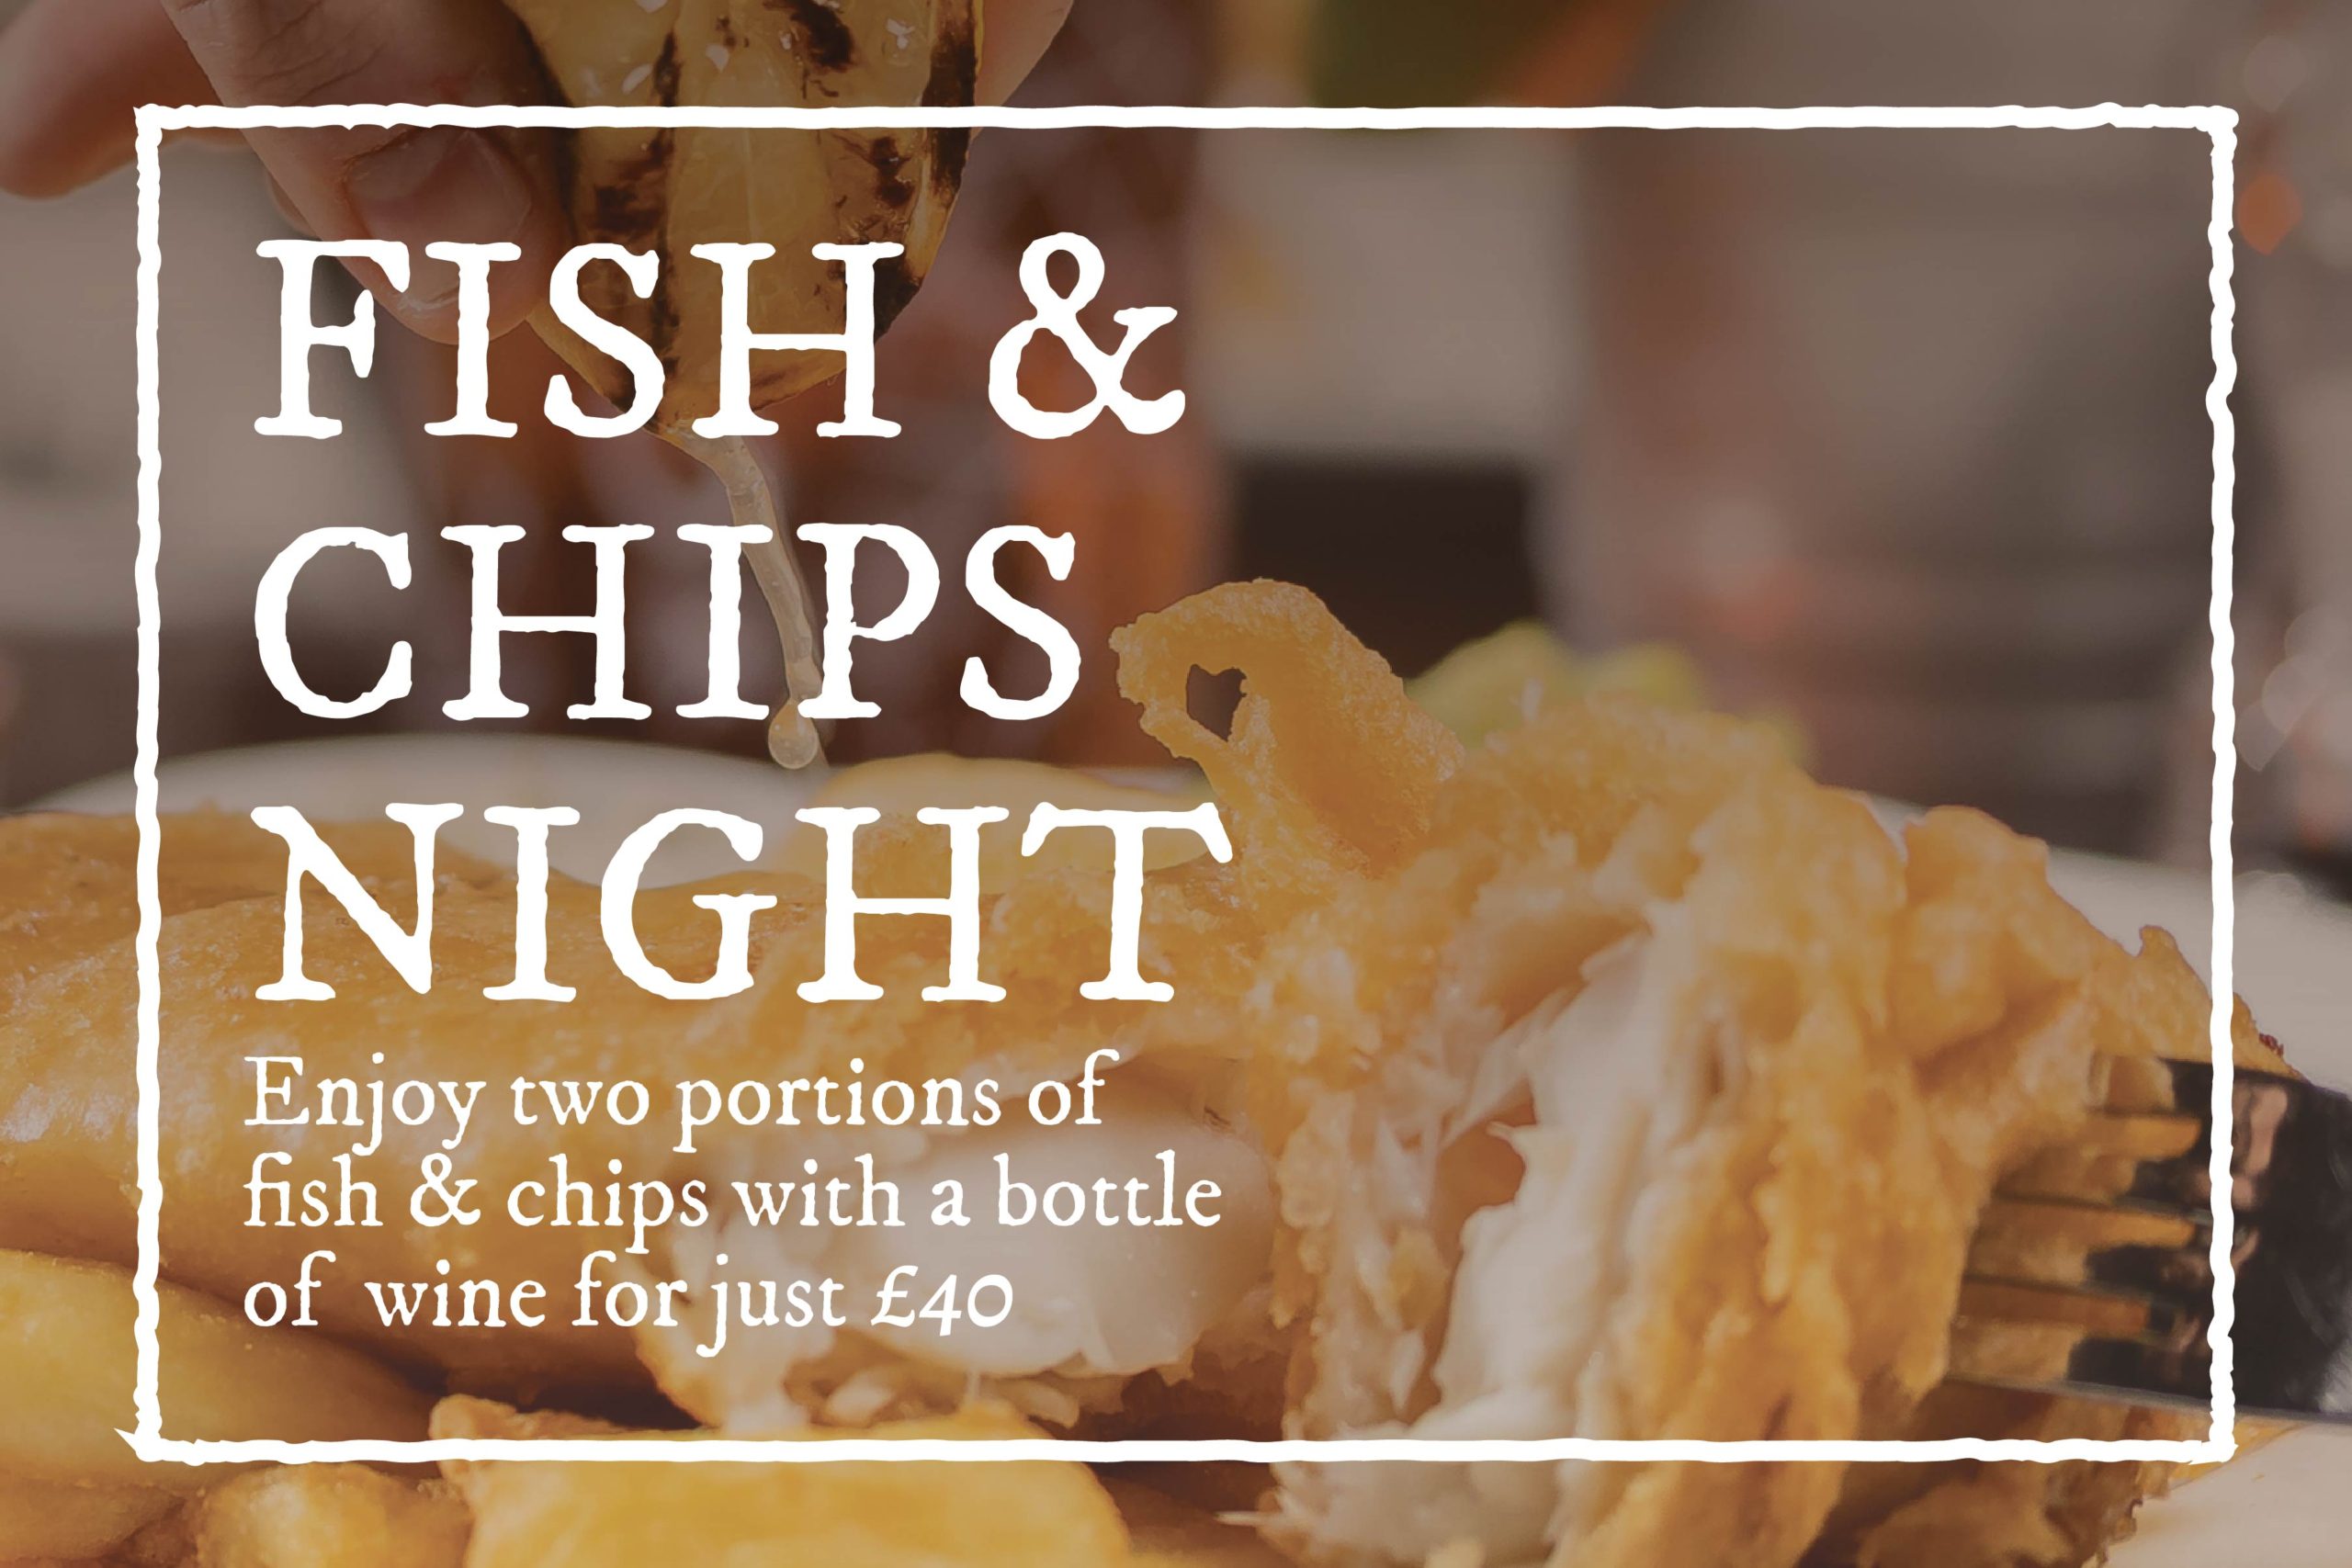 Fish & Chips Bedford. Order 2 and a bottle of wine for £40.